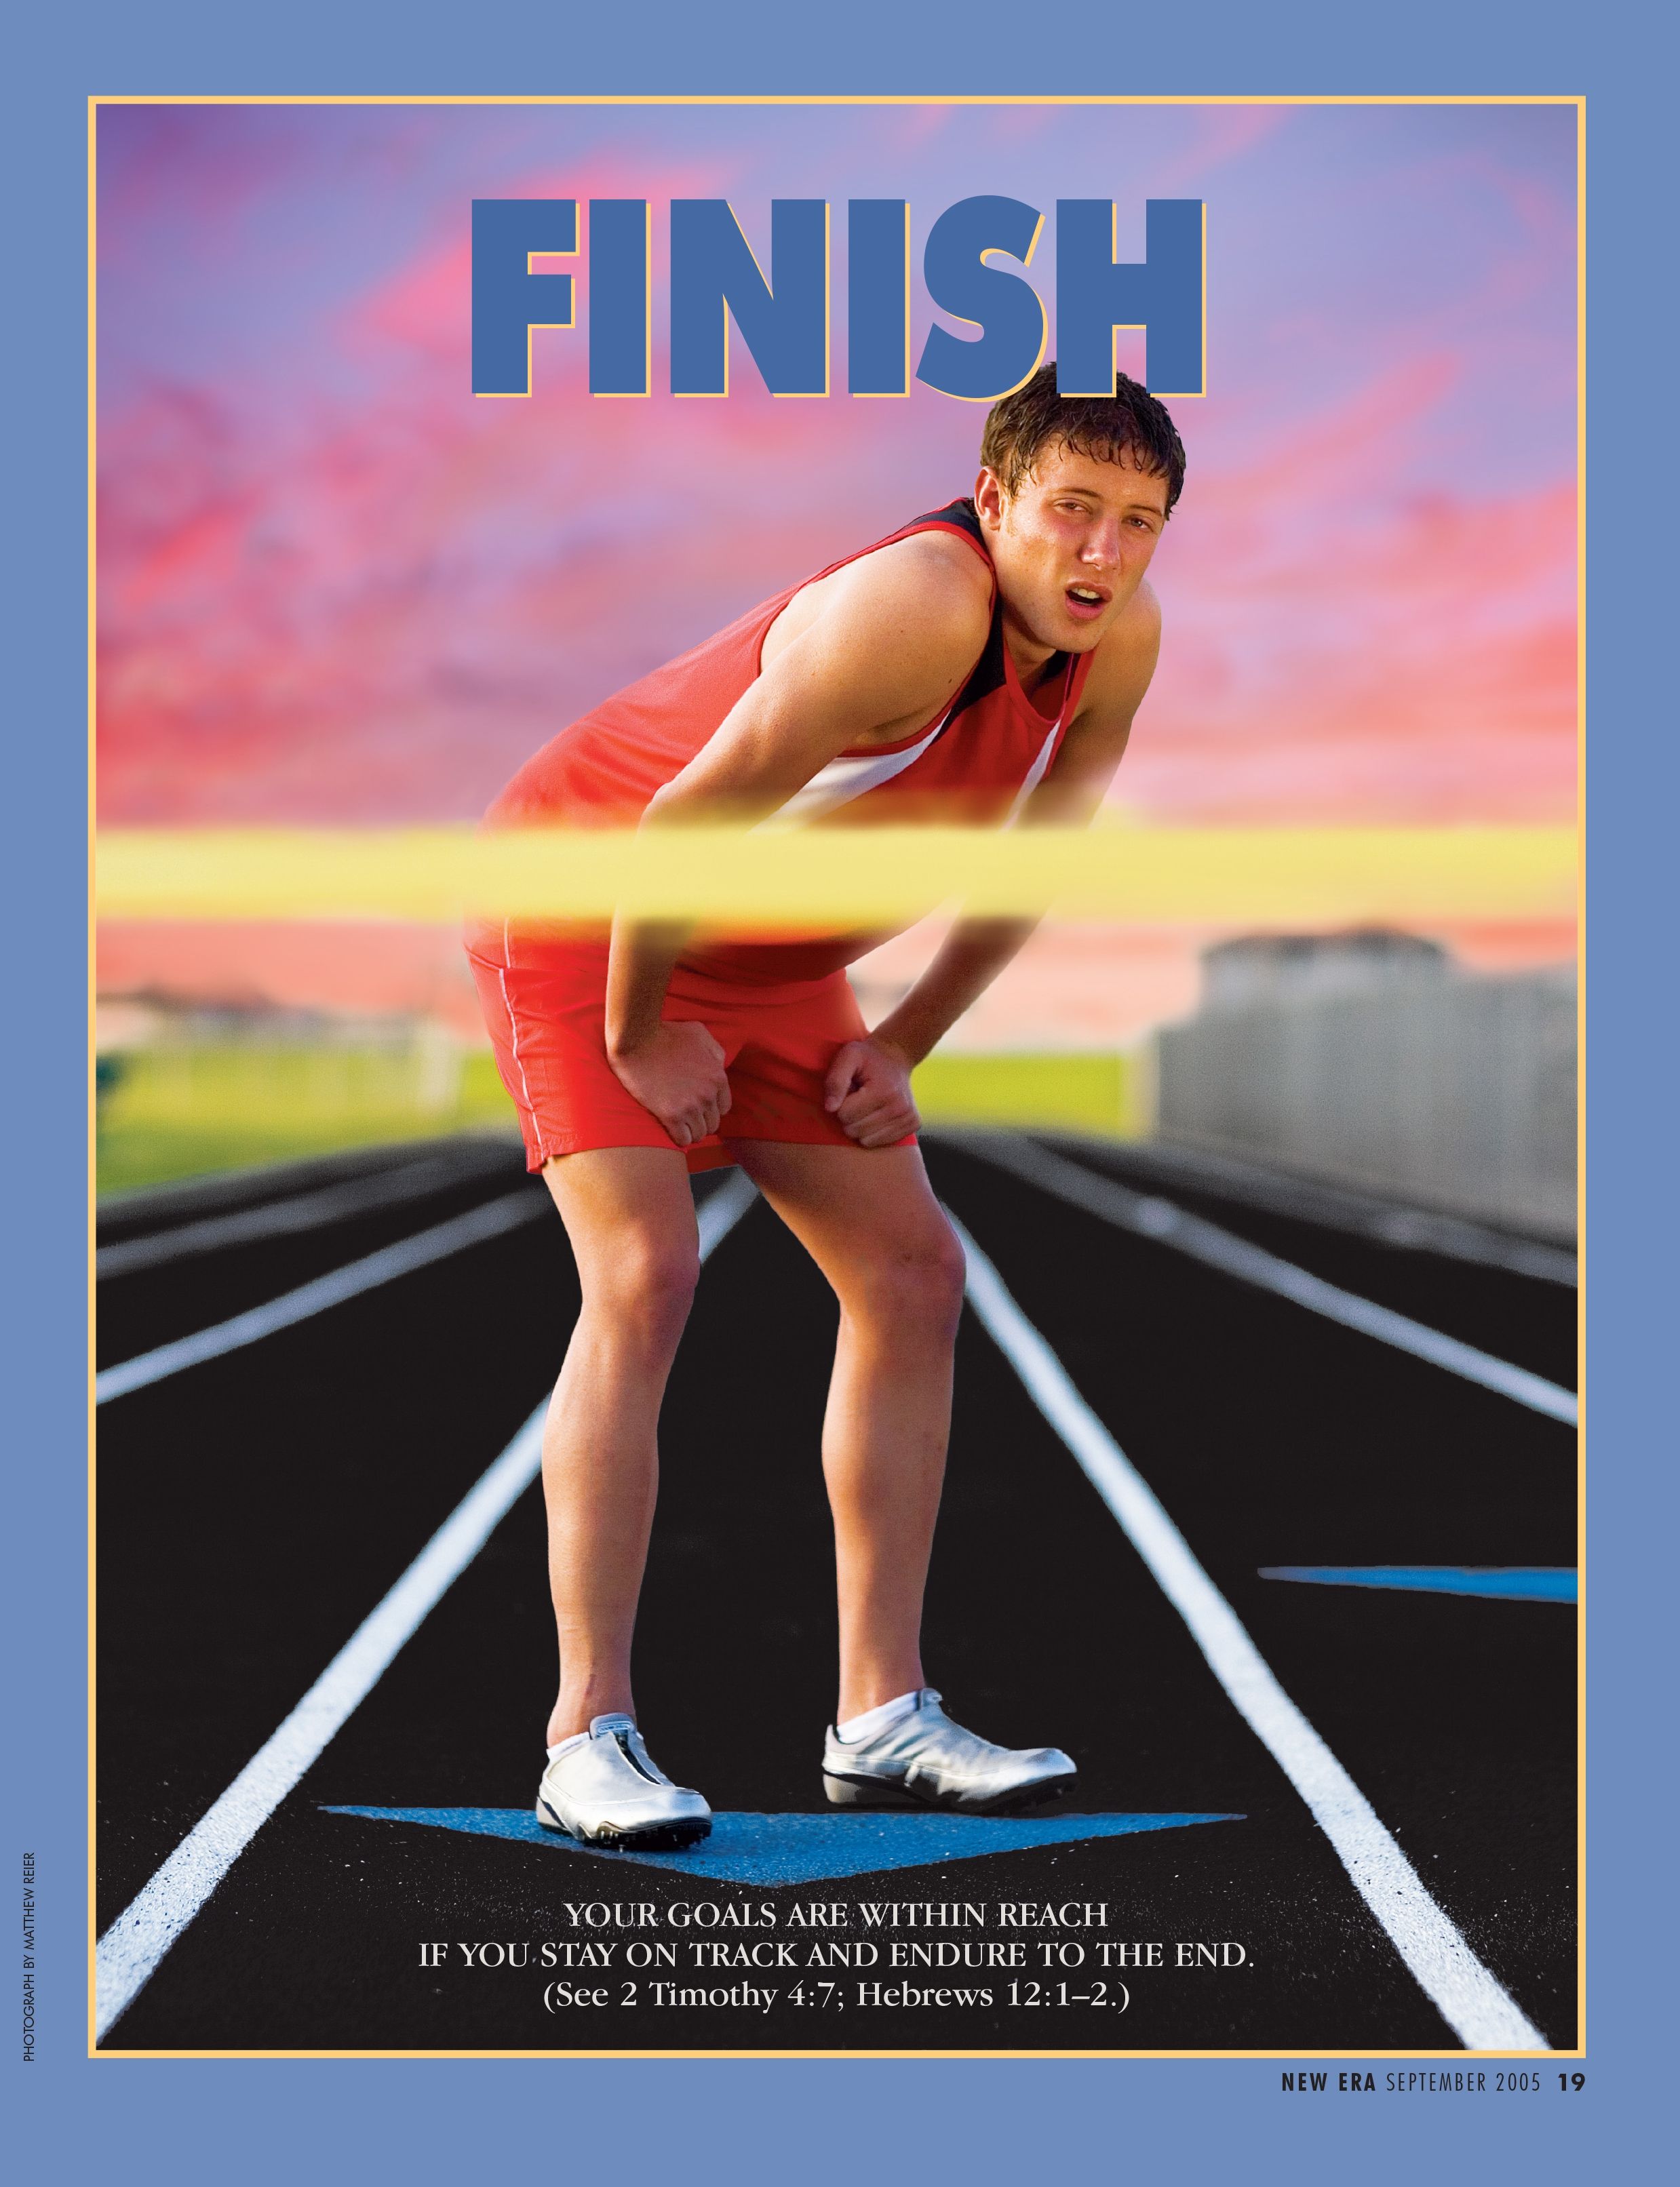 Finish. Your goals are within reach if you stay on track and endure to the end. (See 2 Timothy 4:7; Hebrews 12:1–2.) Sept. 2005